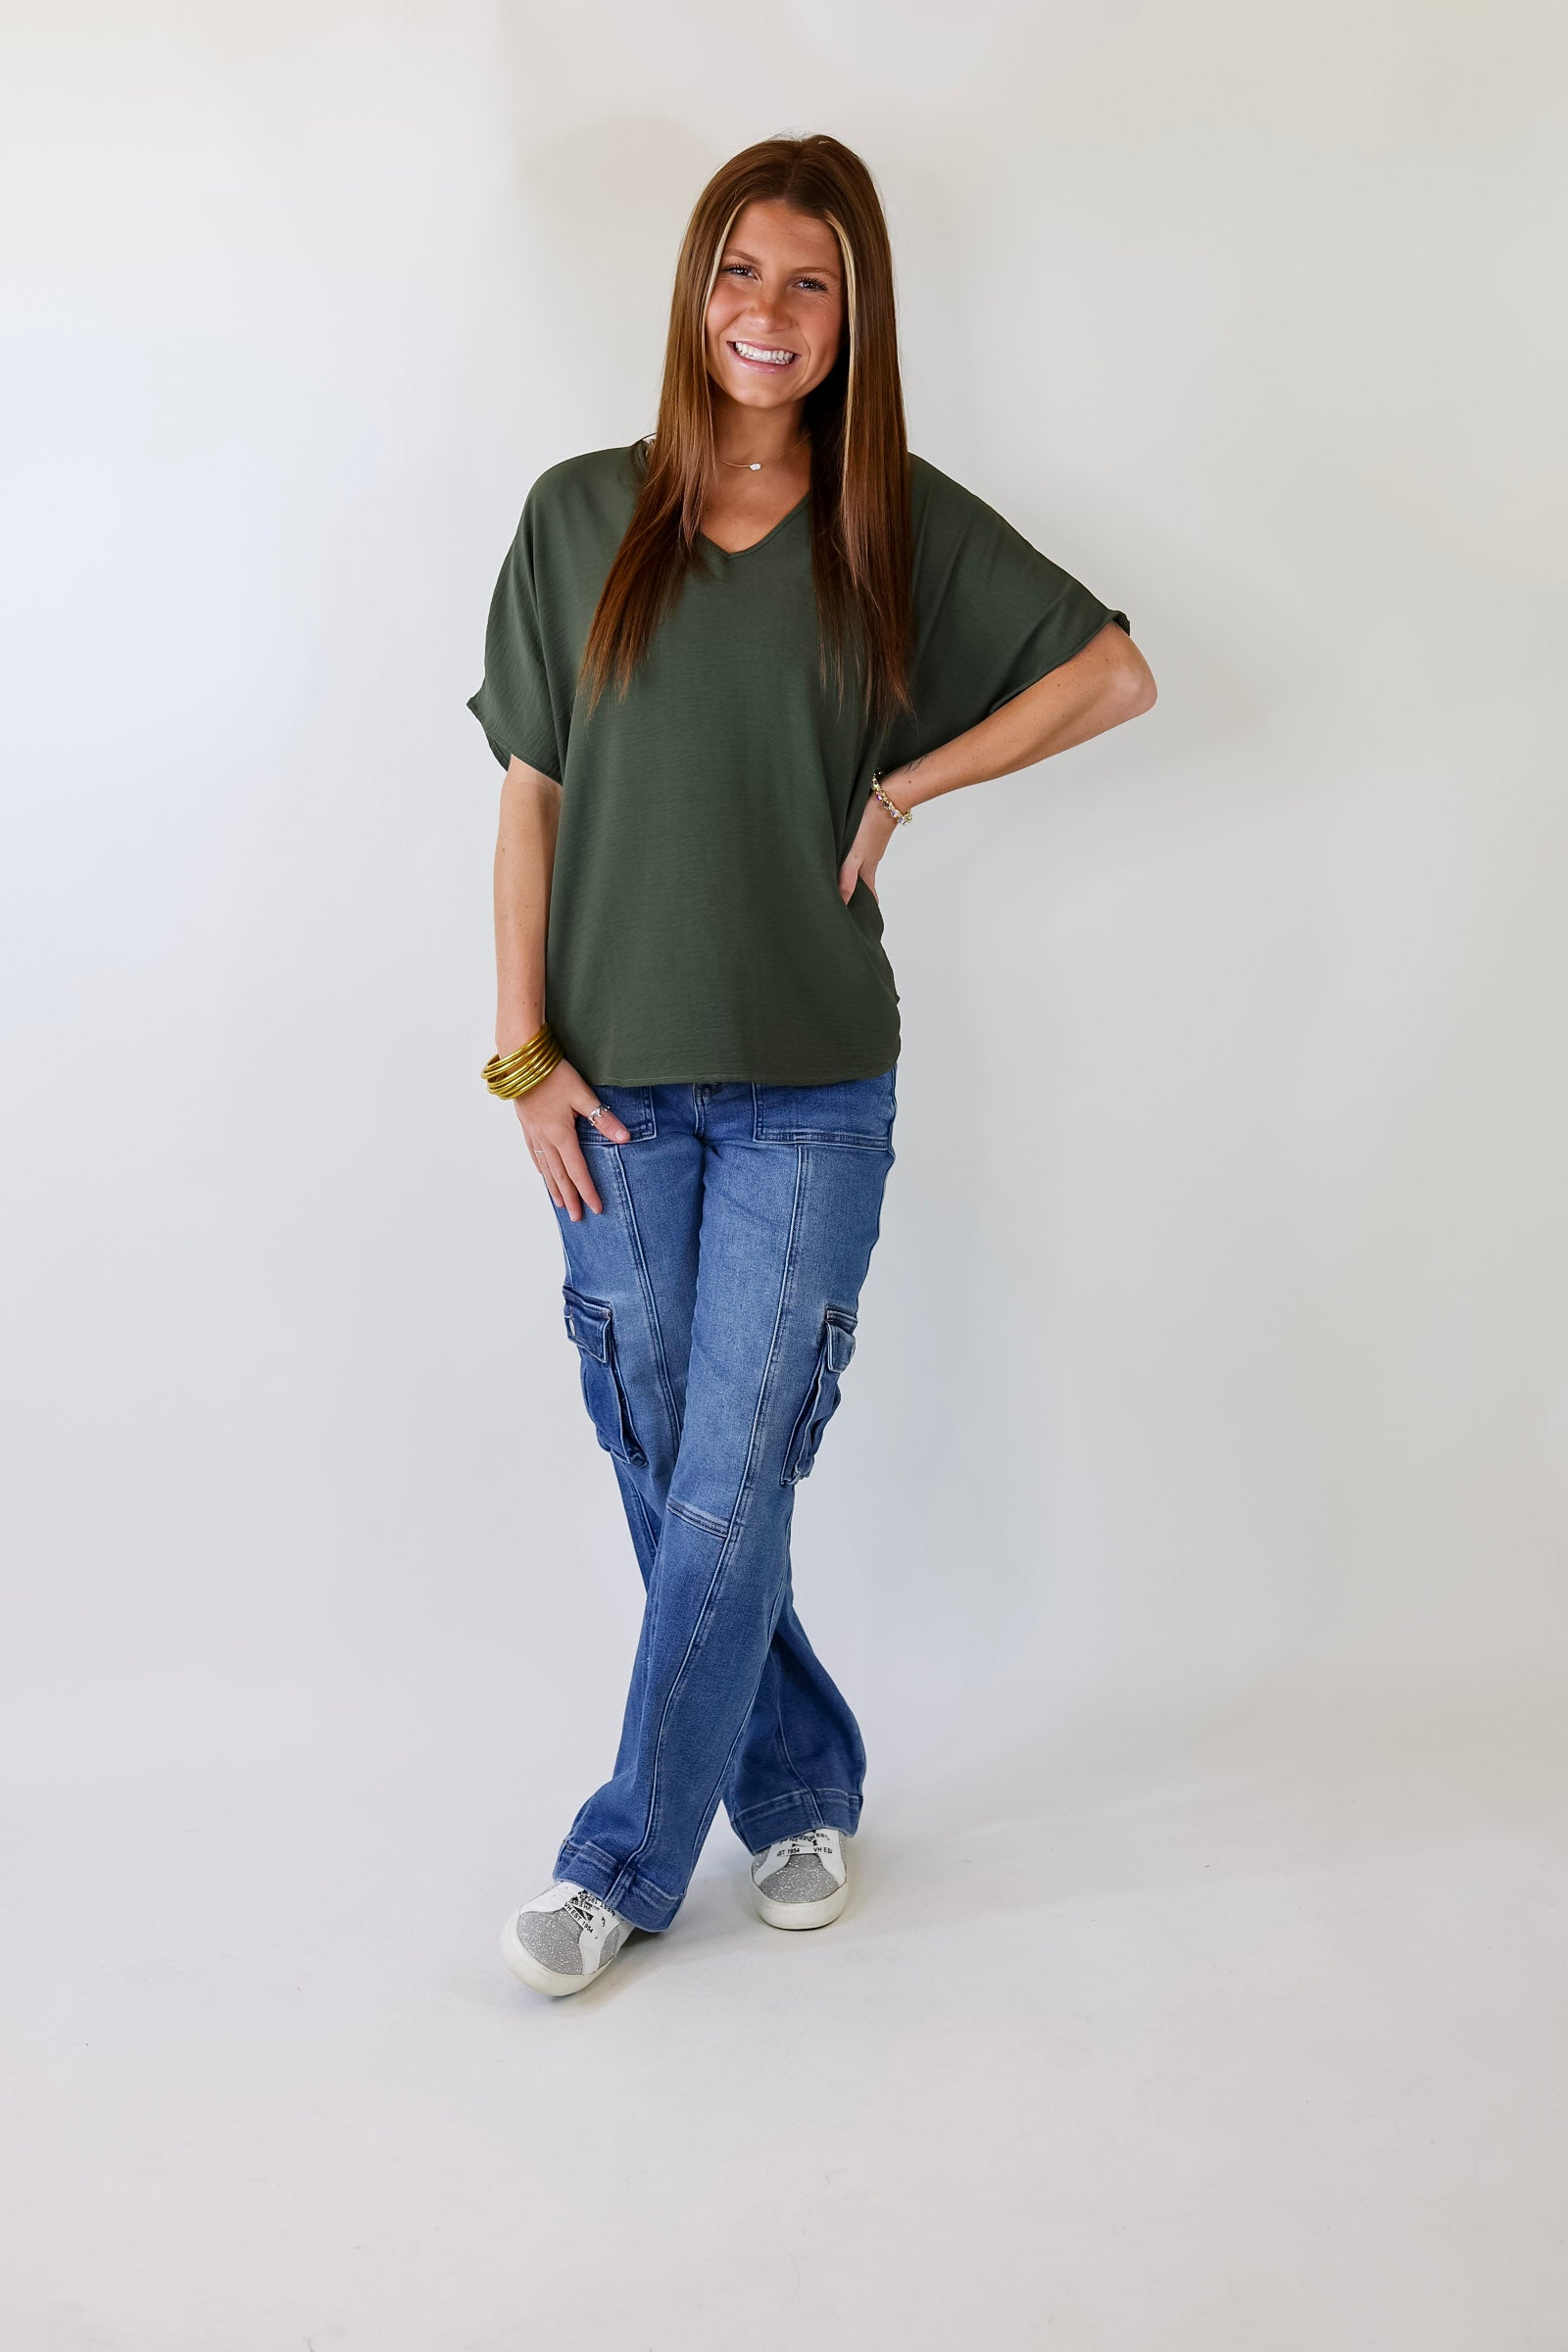 Lovely Dear V Neck Short Sleeve Solid Top in Olive Green - Giddy Up Glamour Boutique